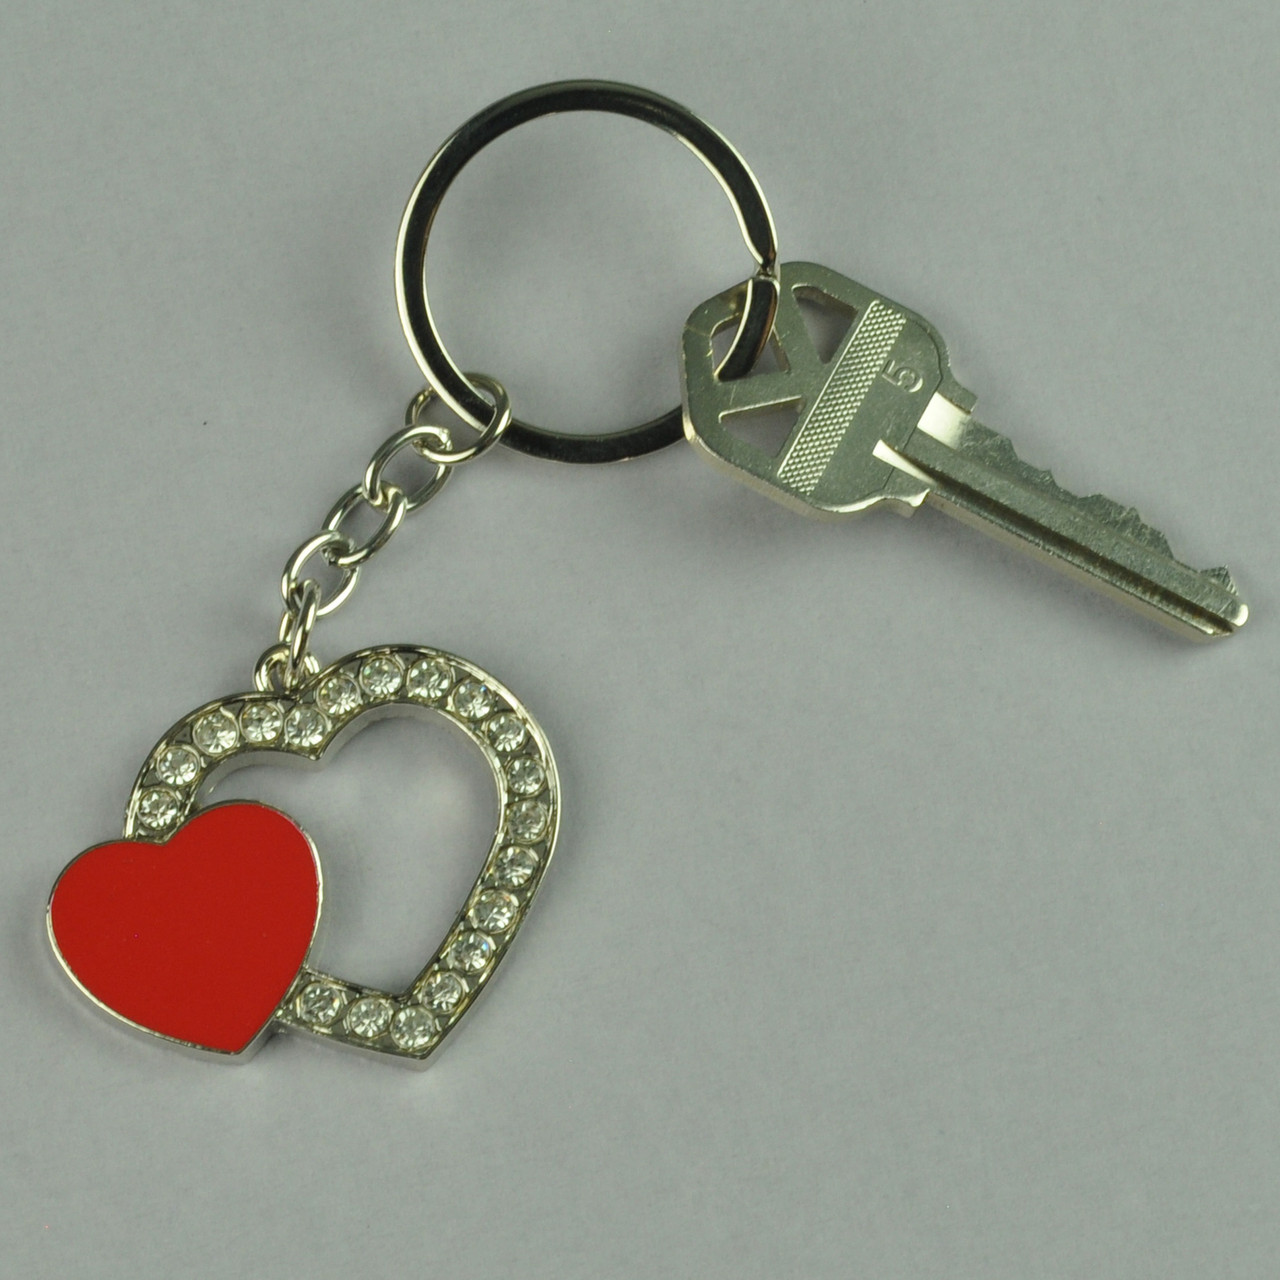 Shop for and Buy Elegant Open Heart Key Holder with Stones at